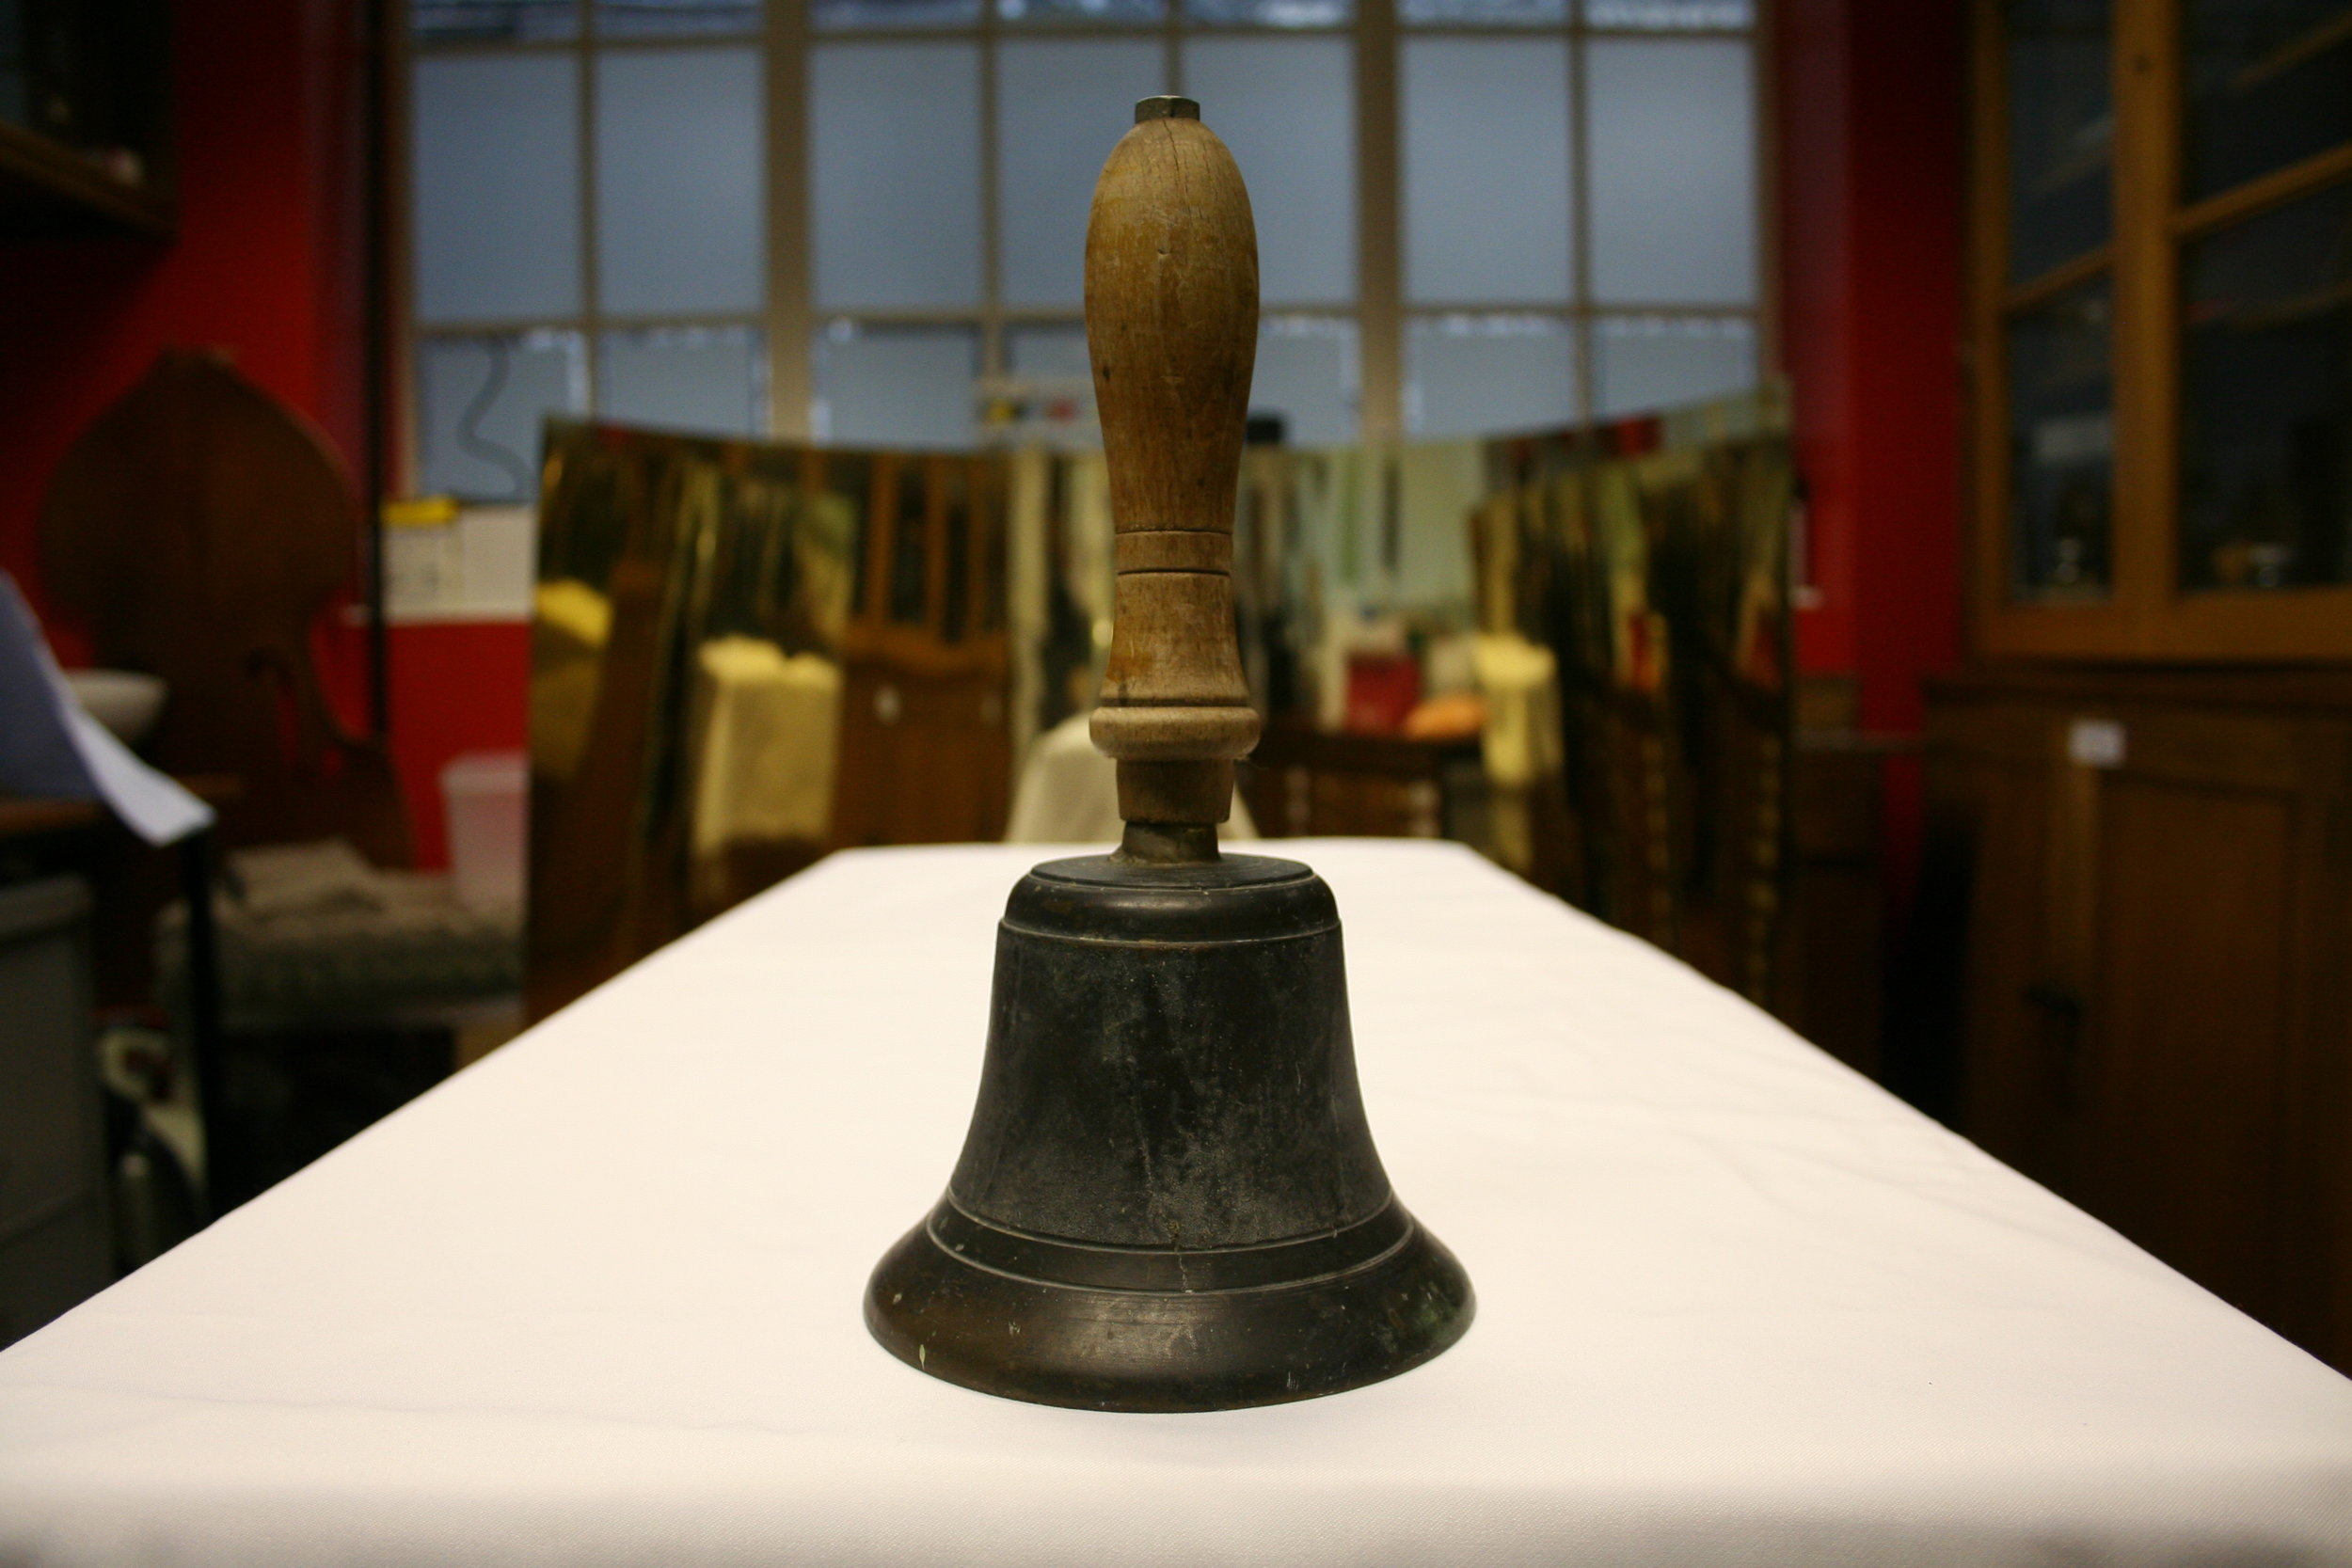 Brass Bell - Materials - Materials Library - Institute of Making